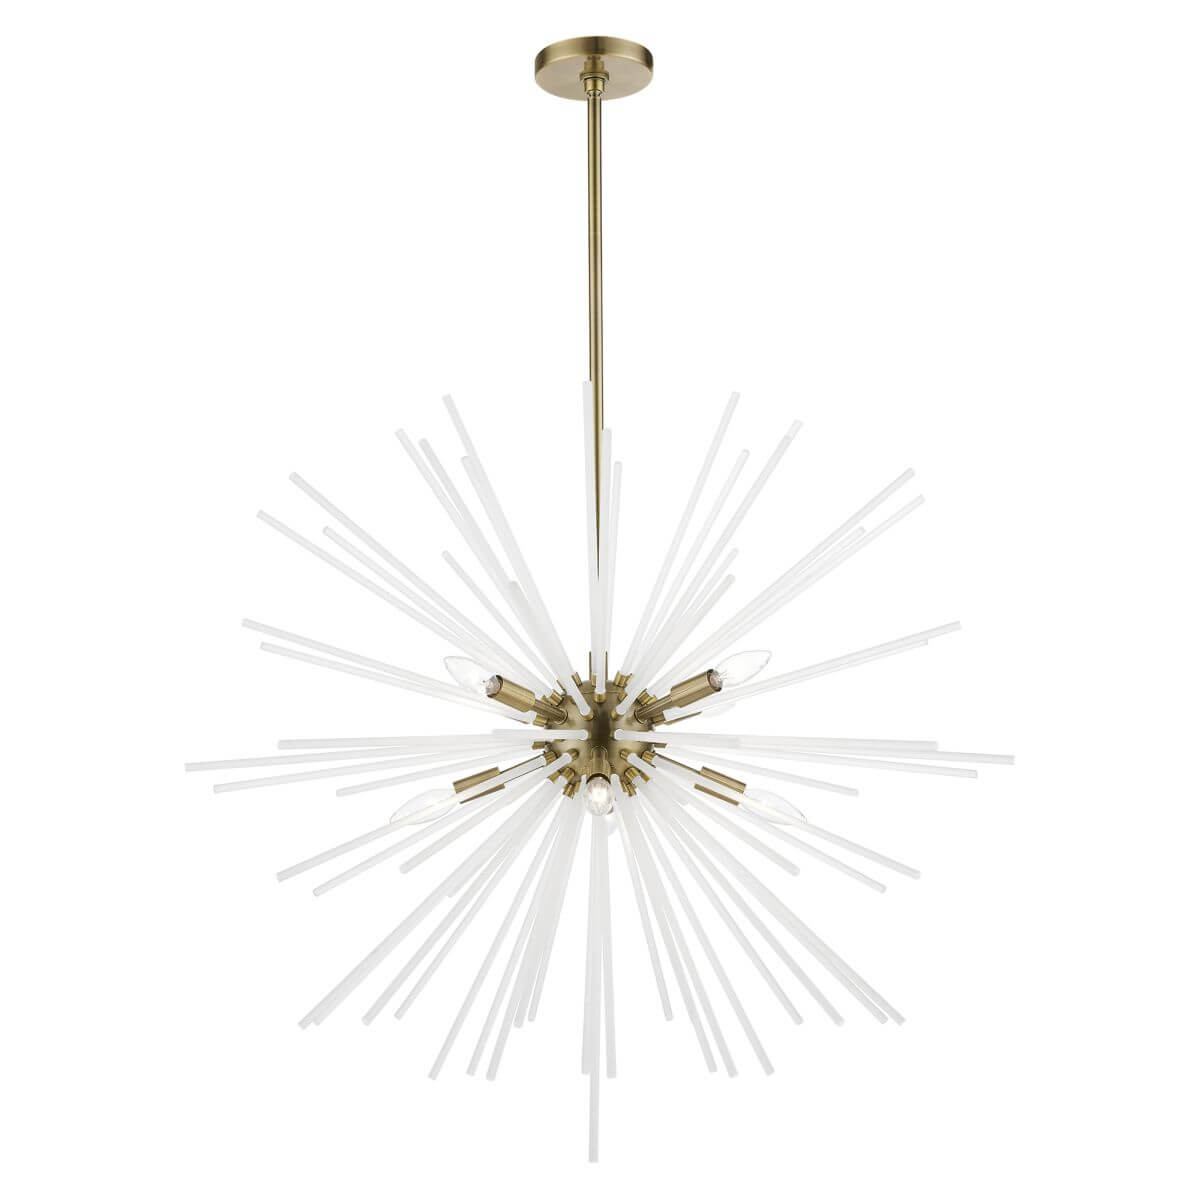 Livex 48828-01 Uptown 8 Light 34 inch Foyer Chandelier in Antique Brass with Acid Etched Rods